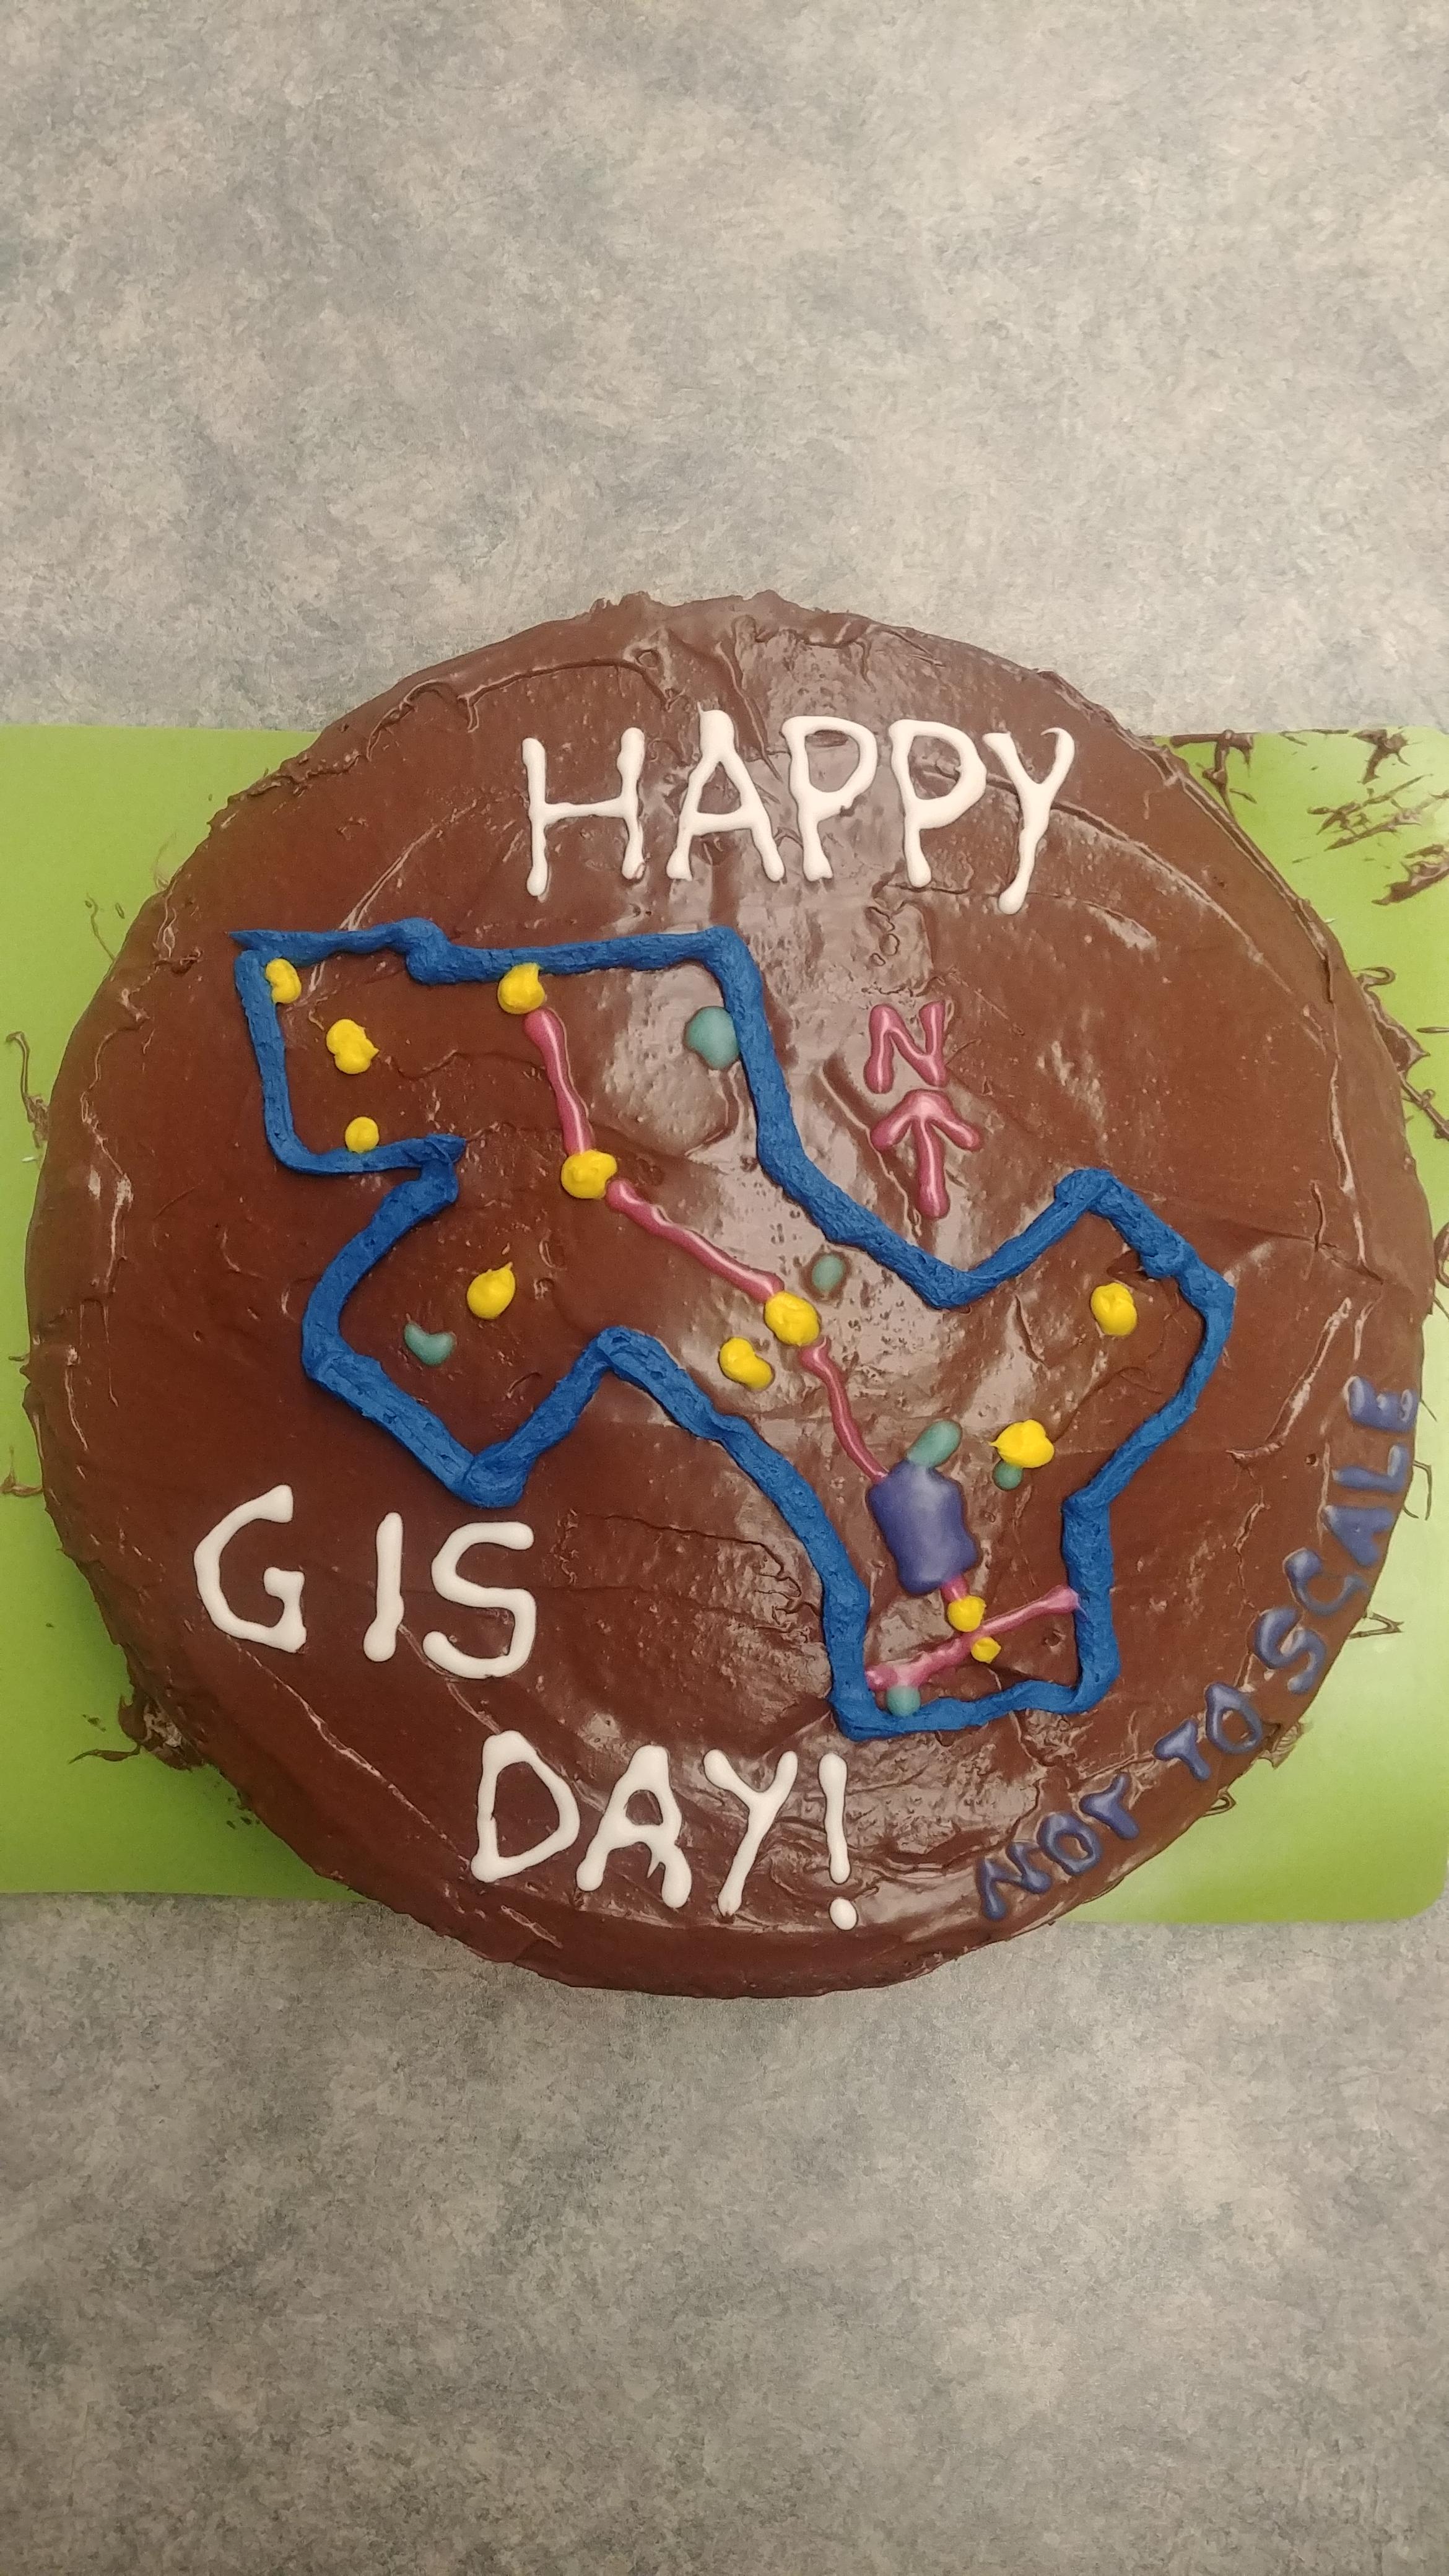 GIS Day cake in Woolwich, Ontario, Canada.